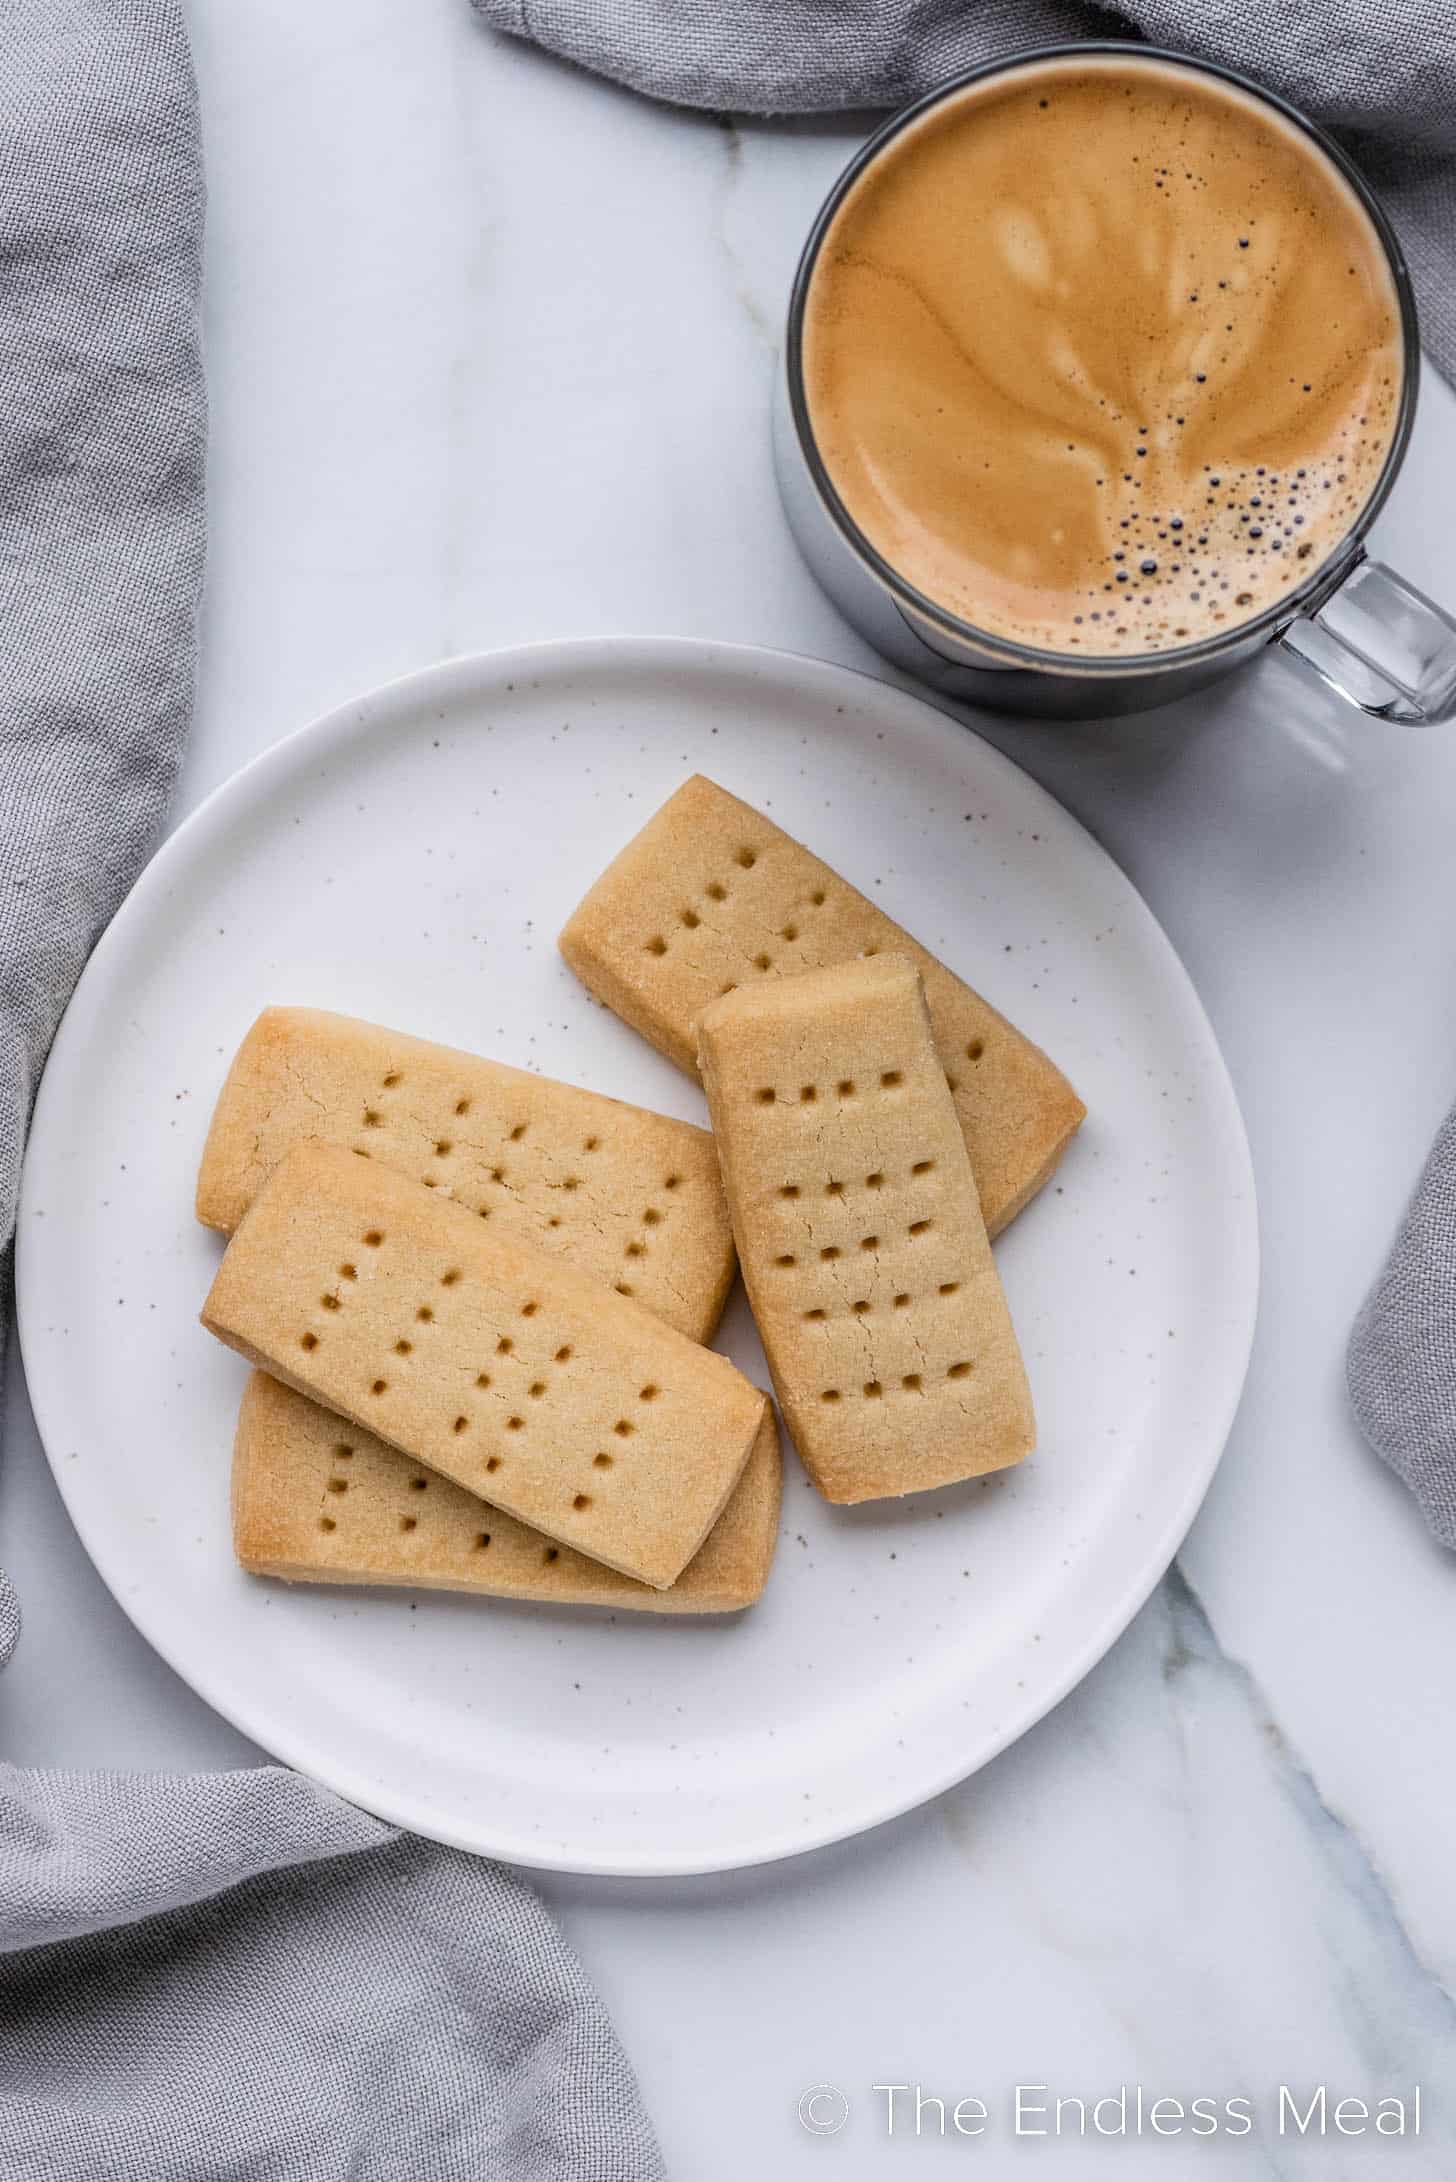 Scottish Shortbread on a plate beside a cup of coffee